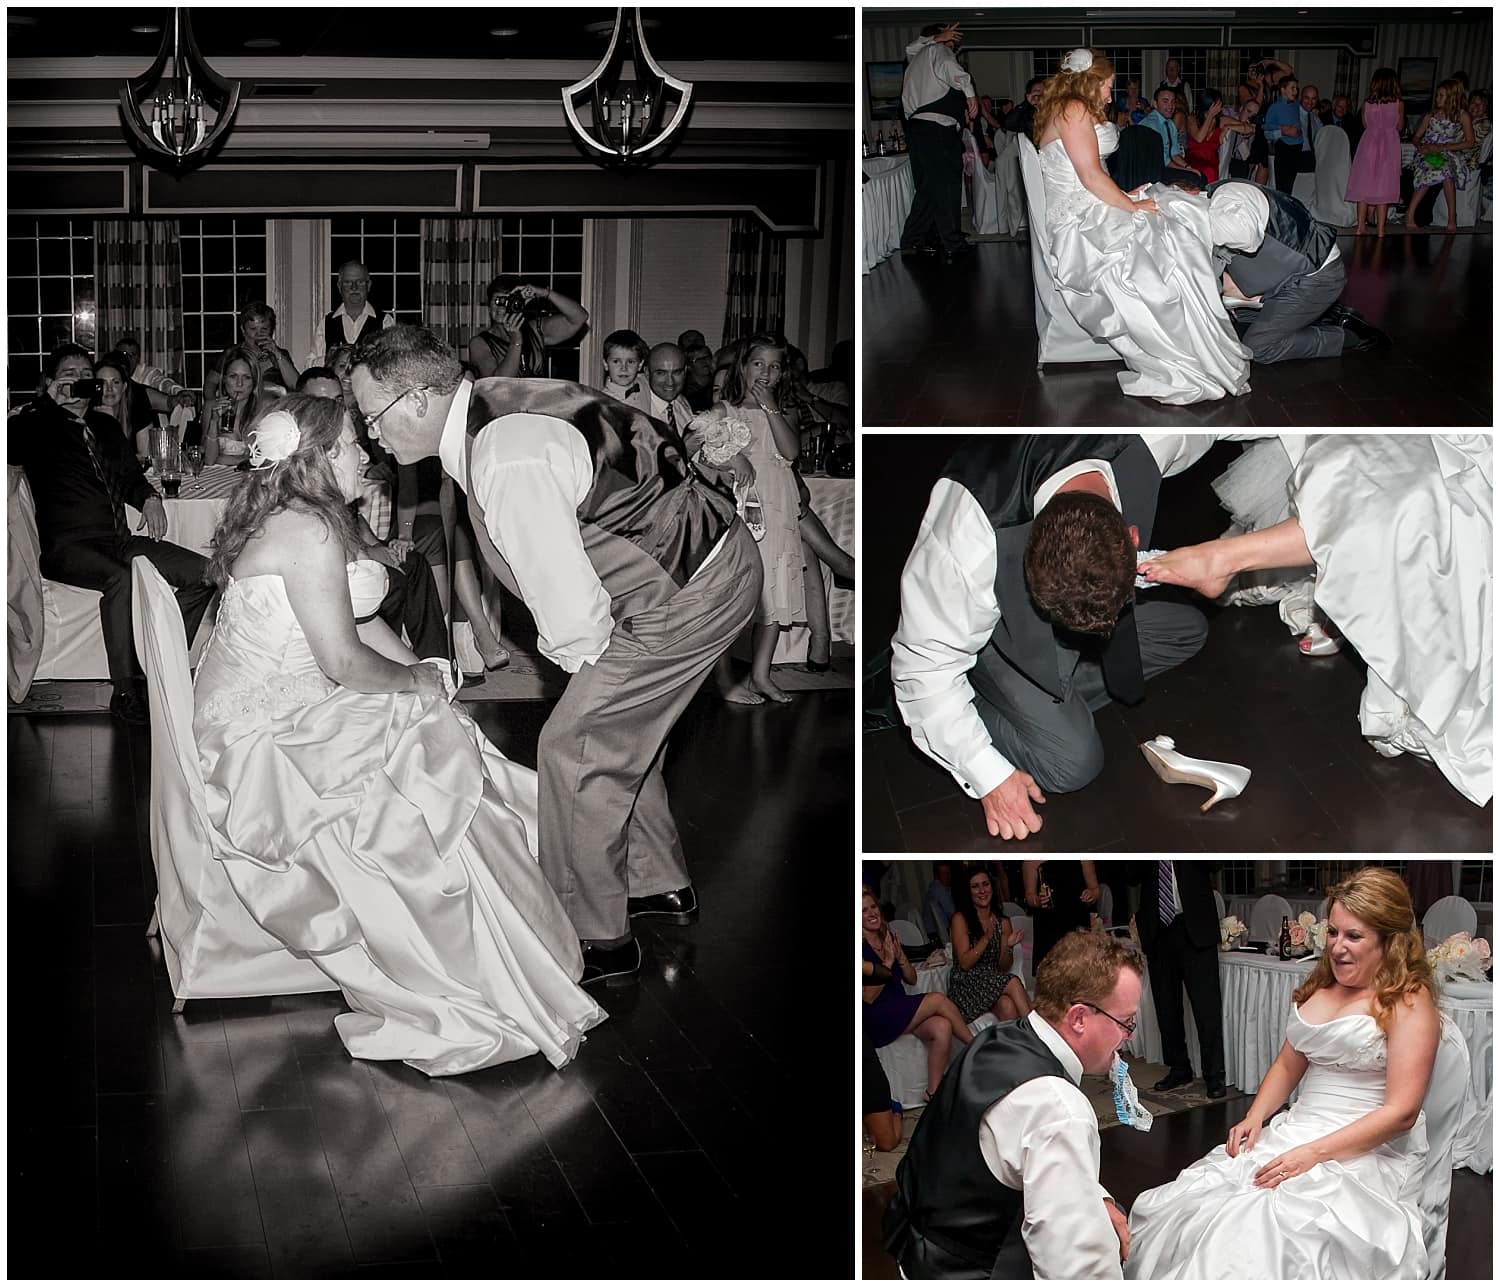 The garter toss by the groom with the bride at their wedding reception at Ashburn Golf Club in Halifax, NS.